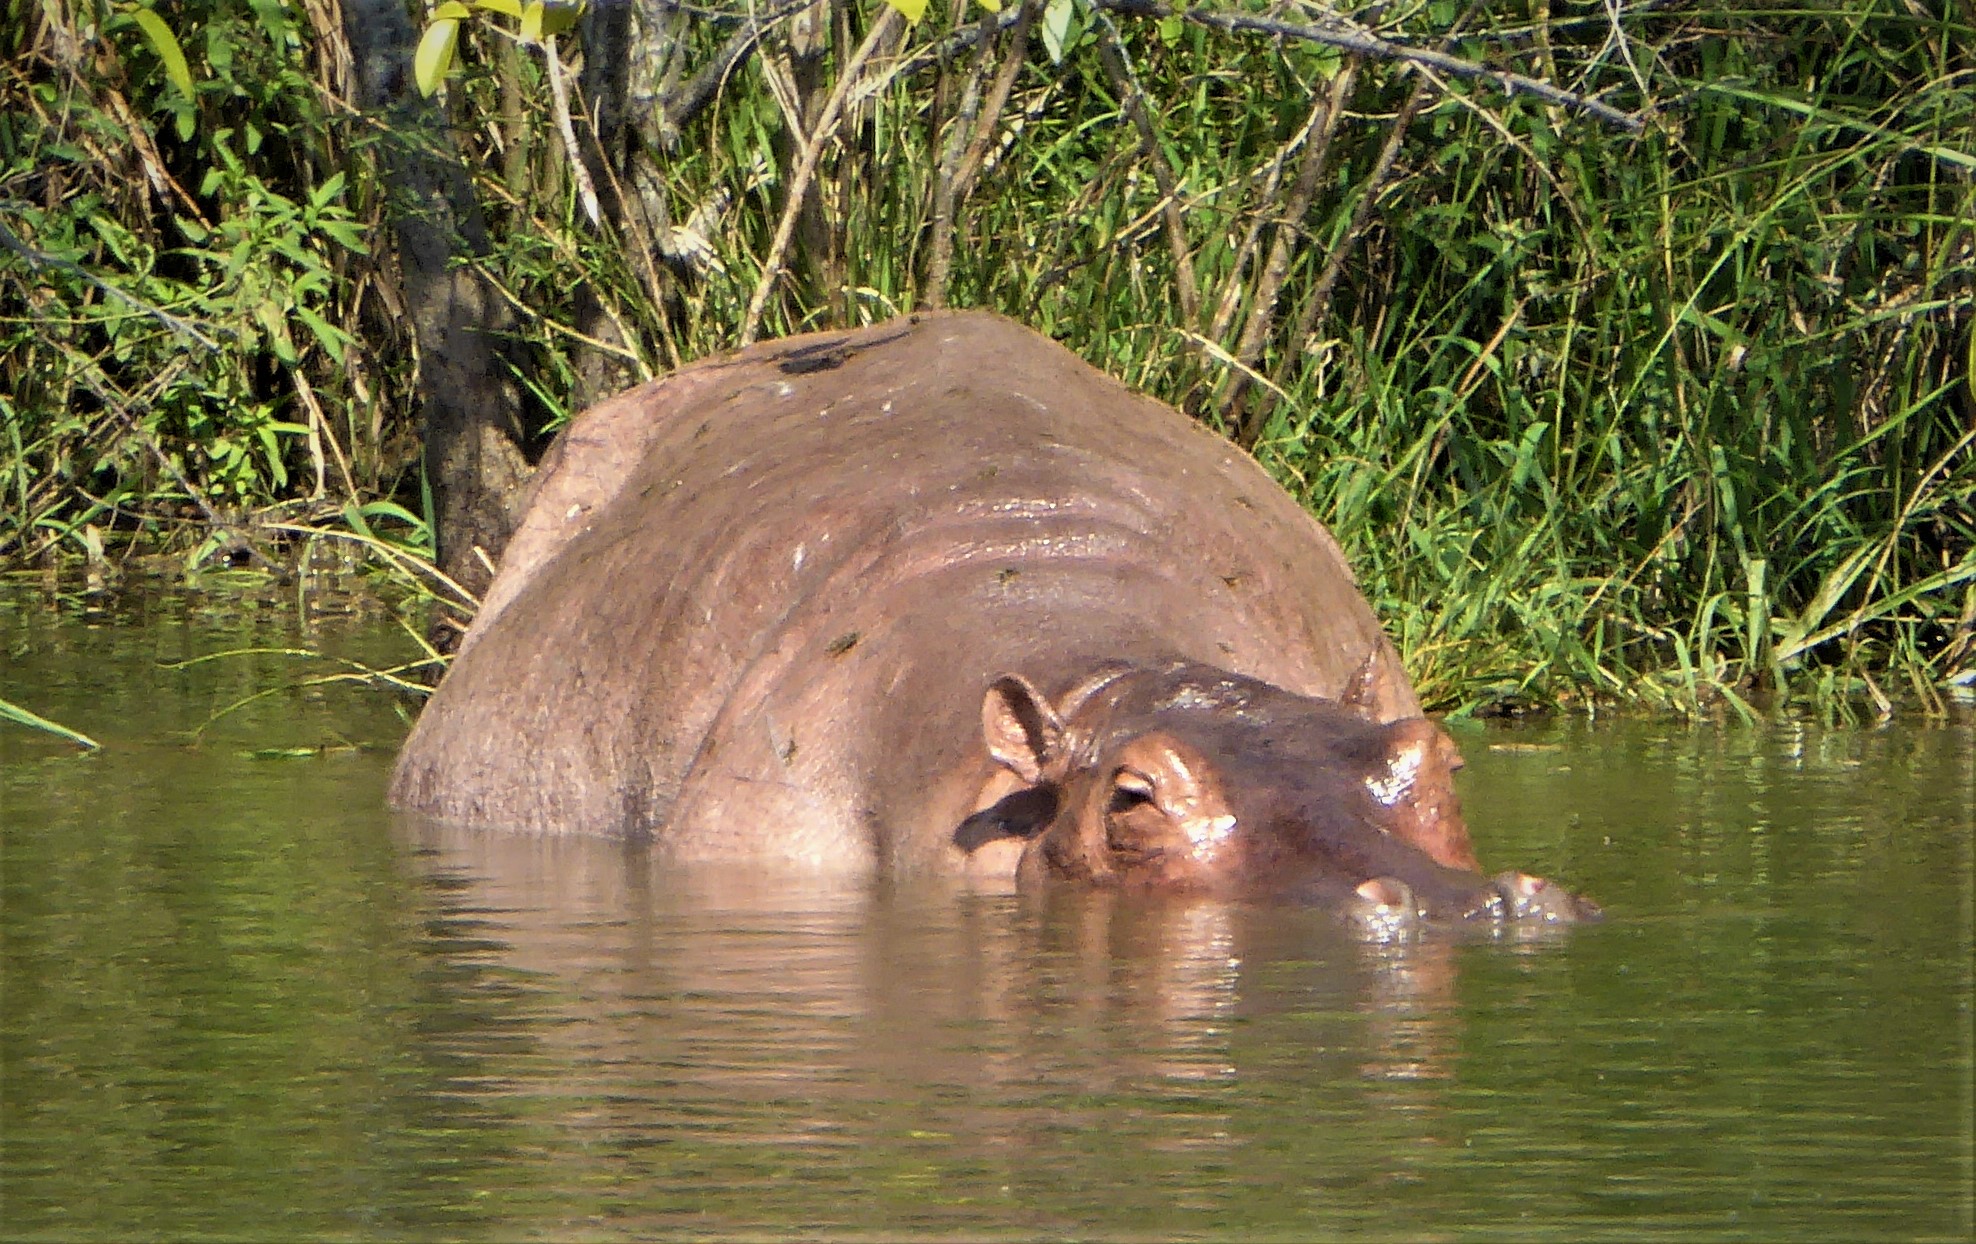 Hippo living in the Magdalena River in Colombia: the African mammals escaped from Pablo Escobar's private zoo in the 1980s.